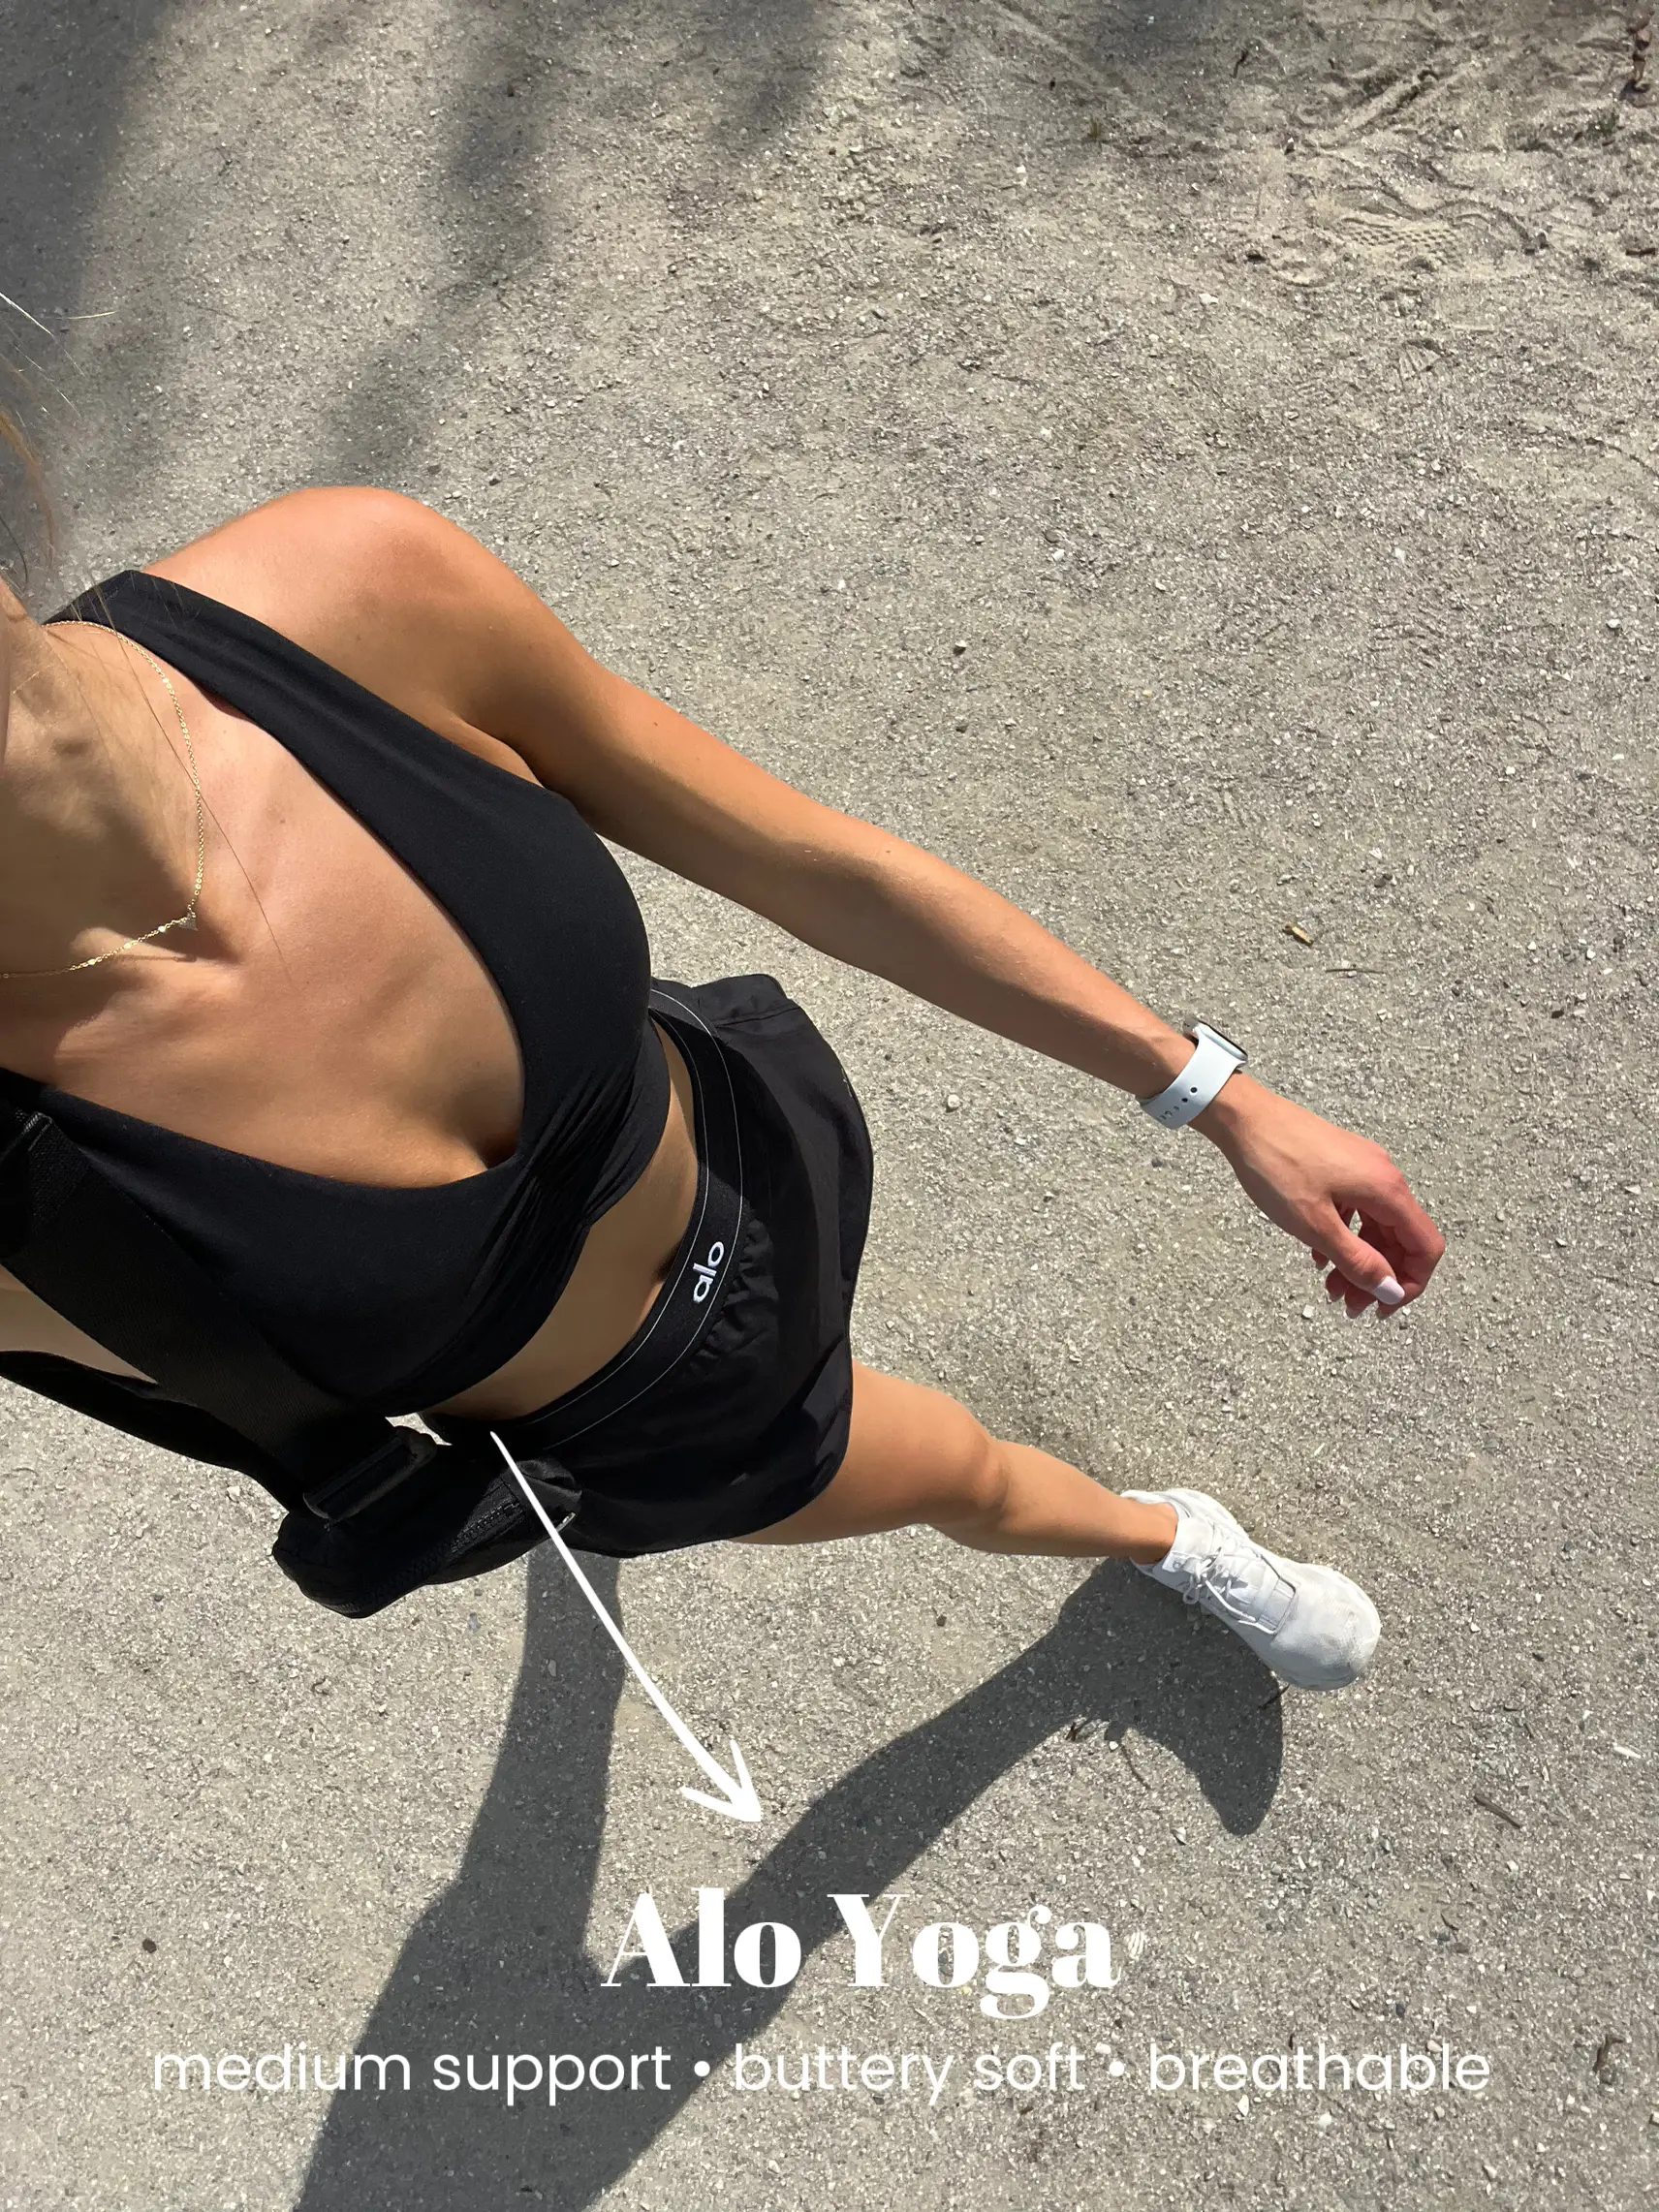 Summer workout clothes to beat the heat - Lemon8 Search